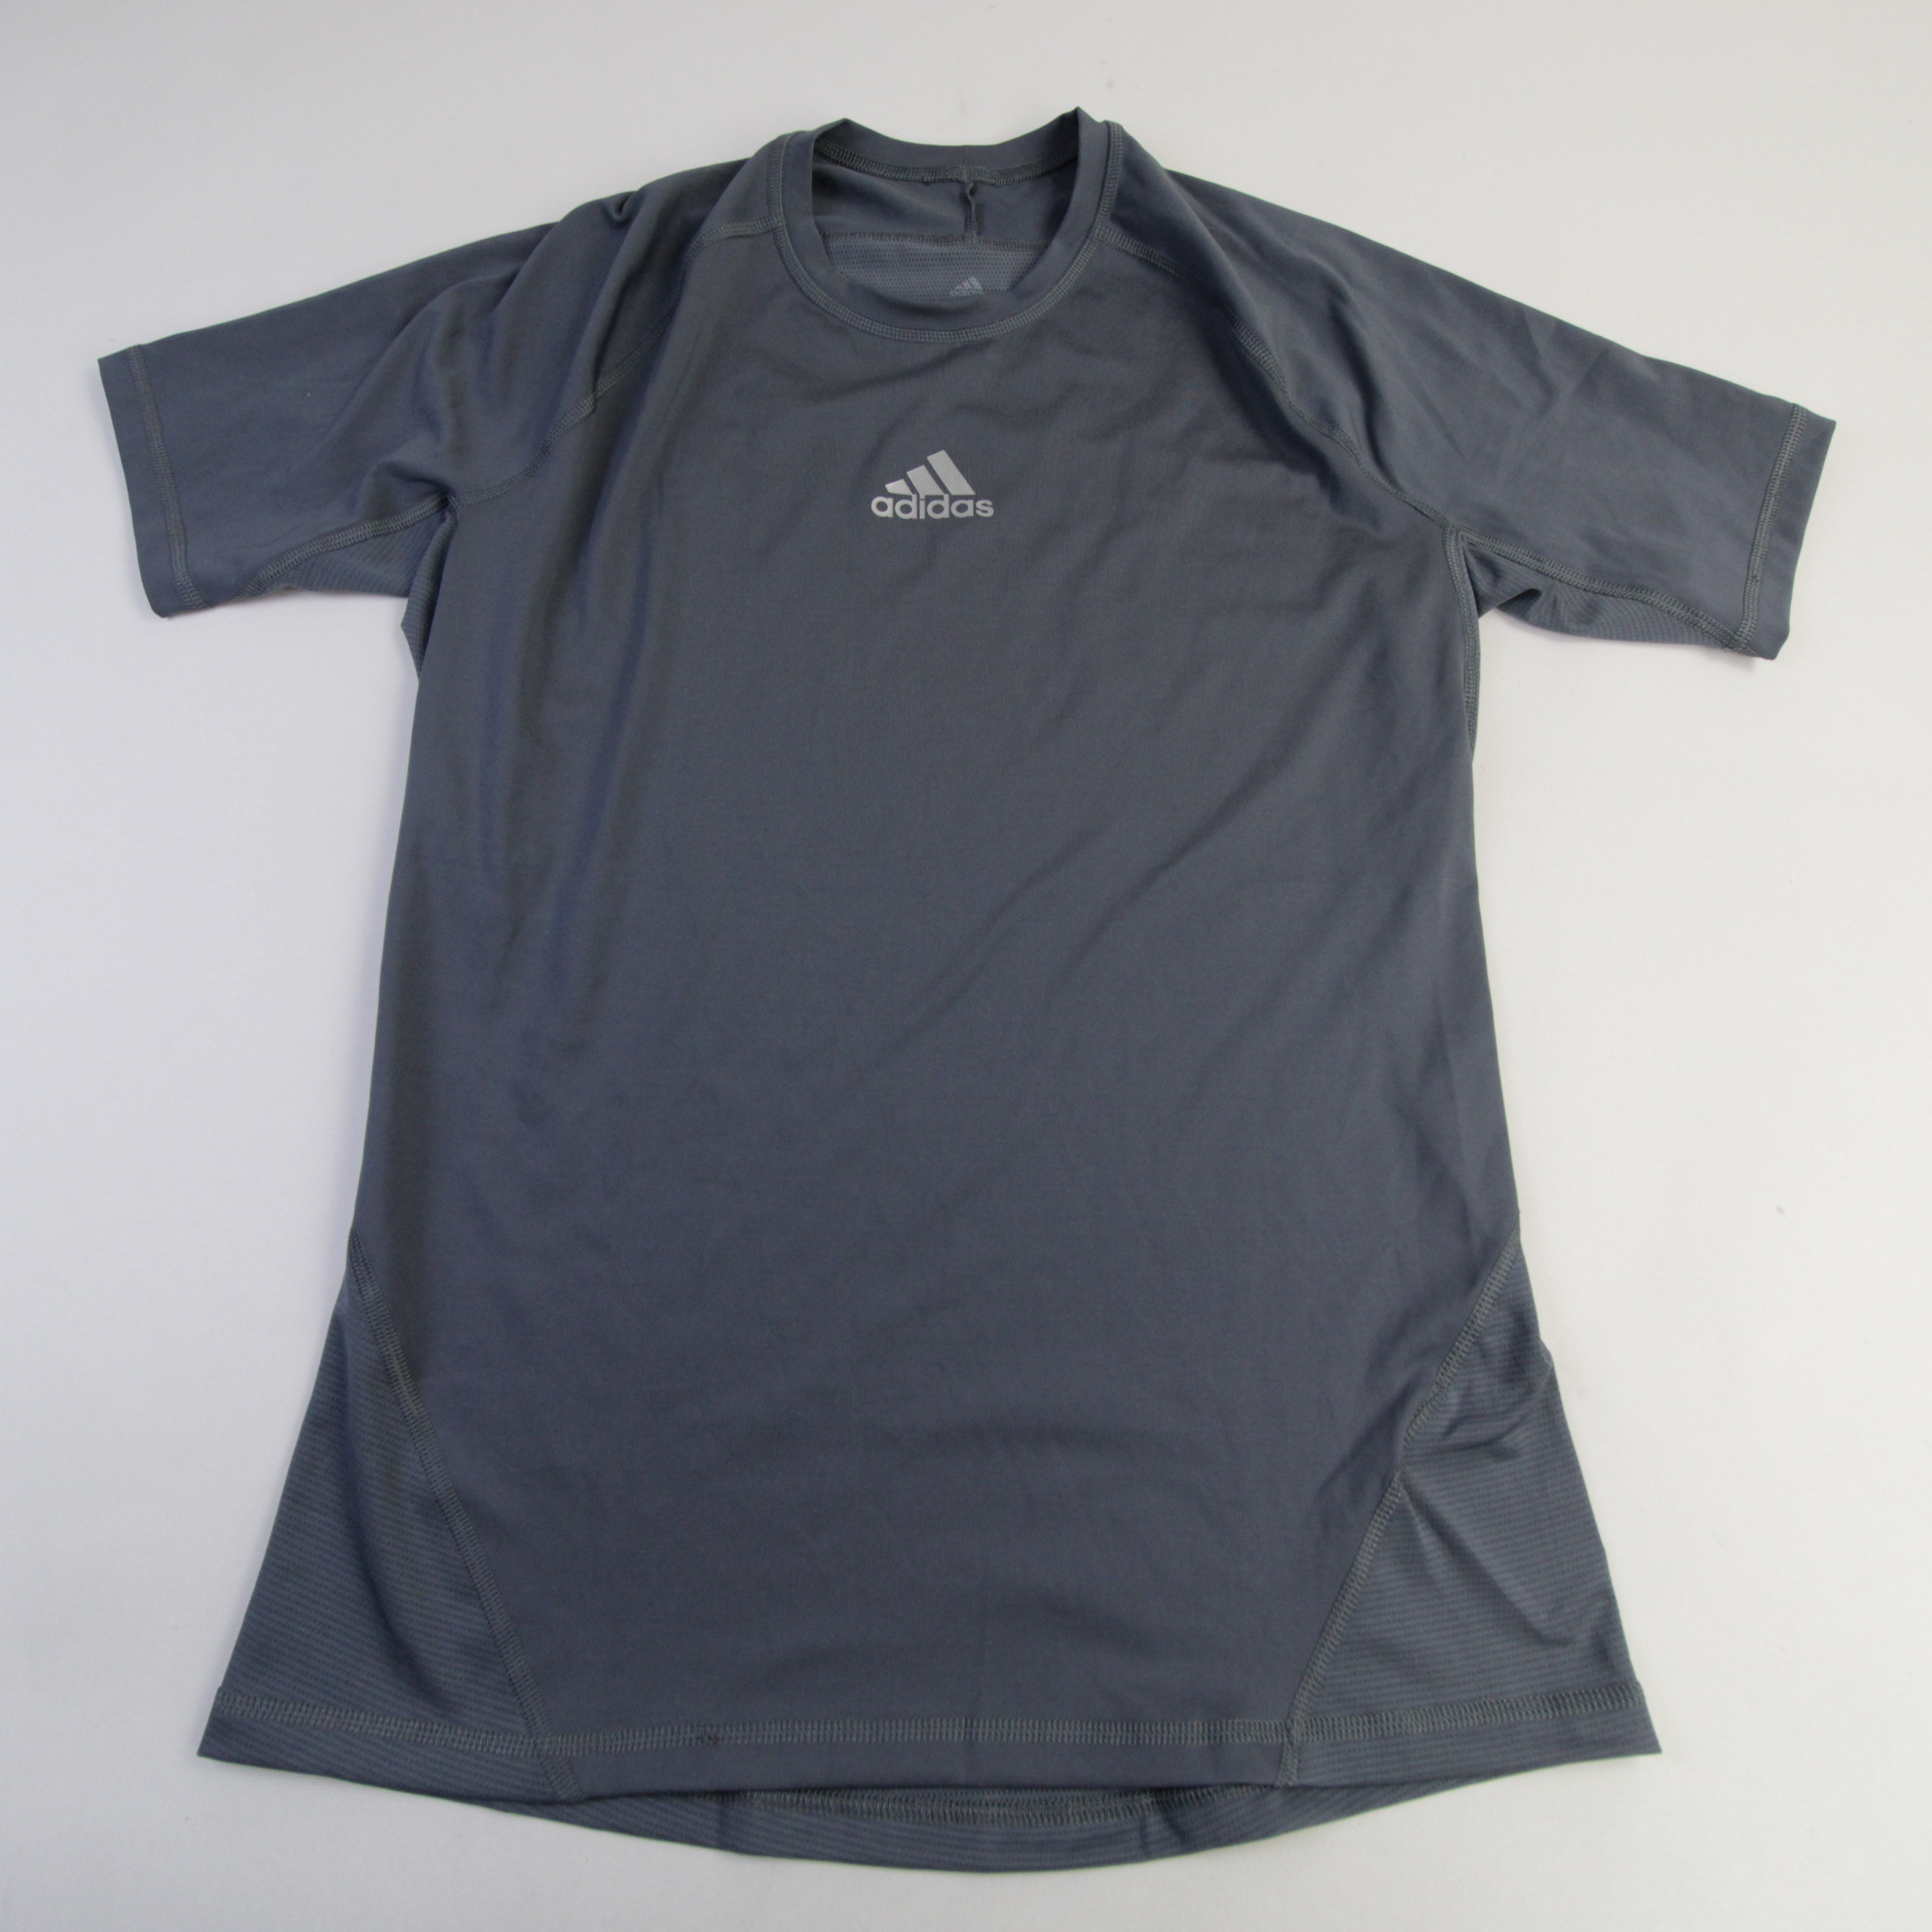 adidas Techfit Compression Top Shirt Men's M L 2XL Gray Gym New without  Tags - Helia Beer Co